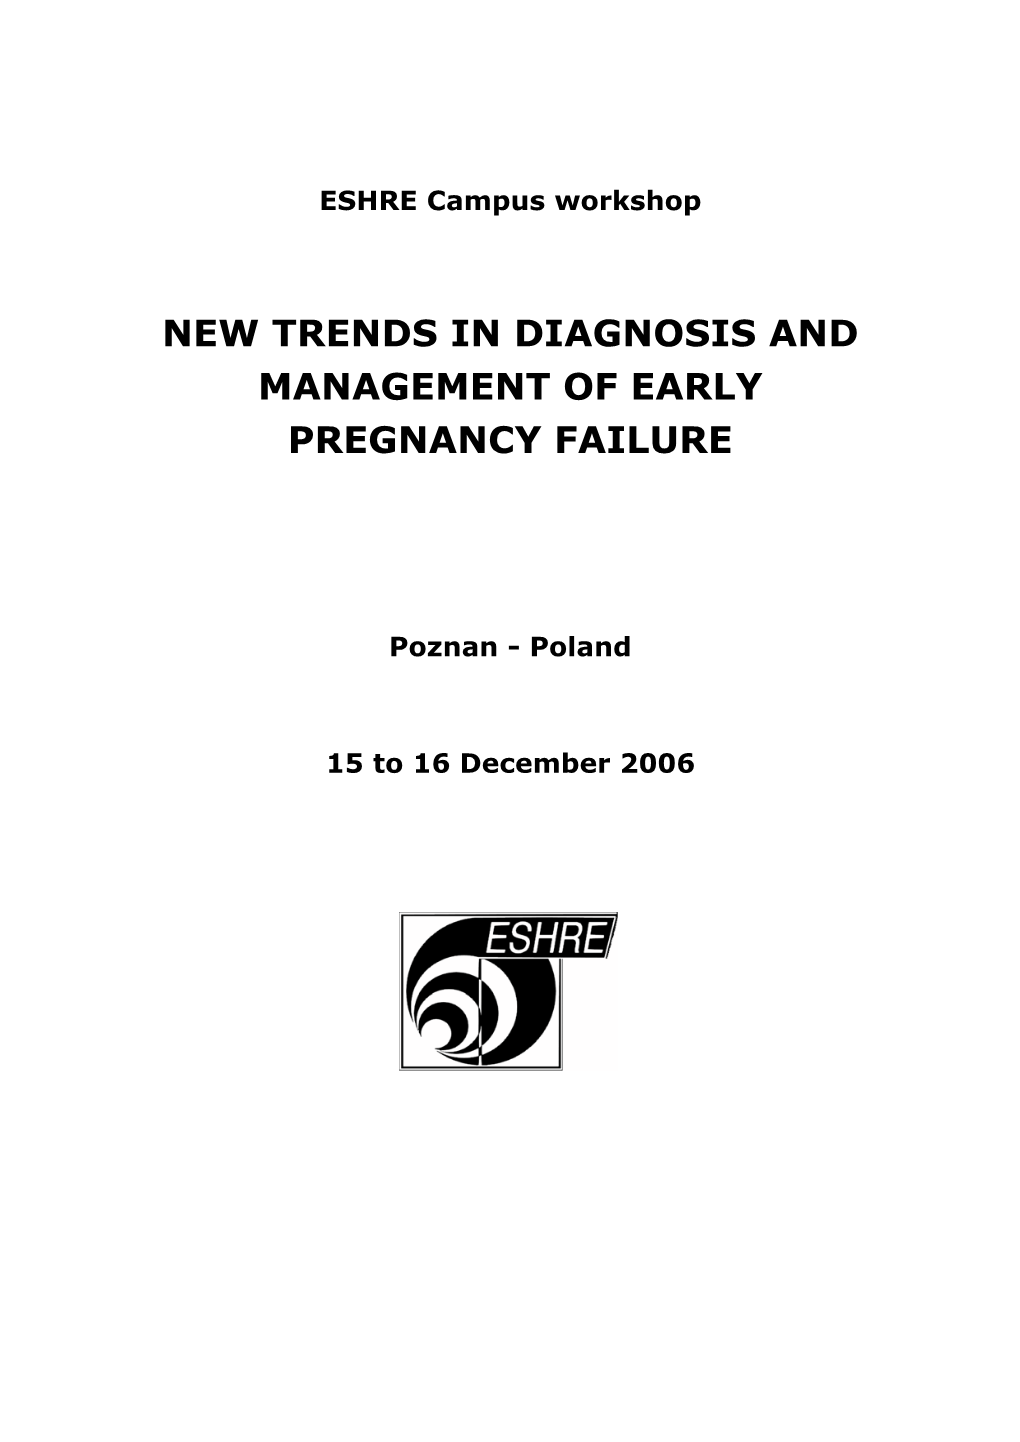 New Trends in Diagnosis and Management of Early Pregnancy Failure